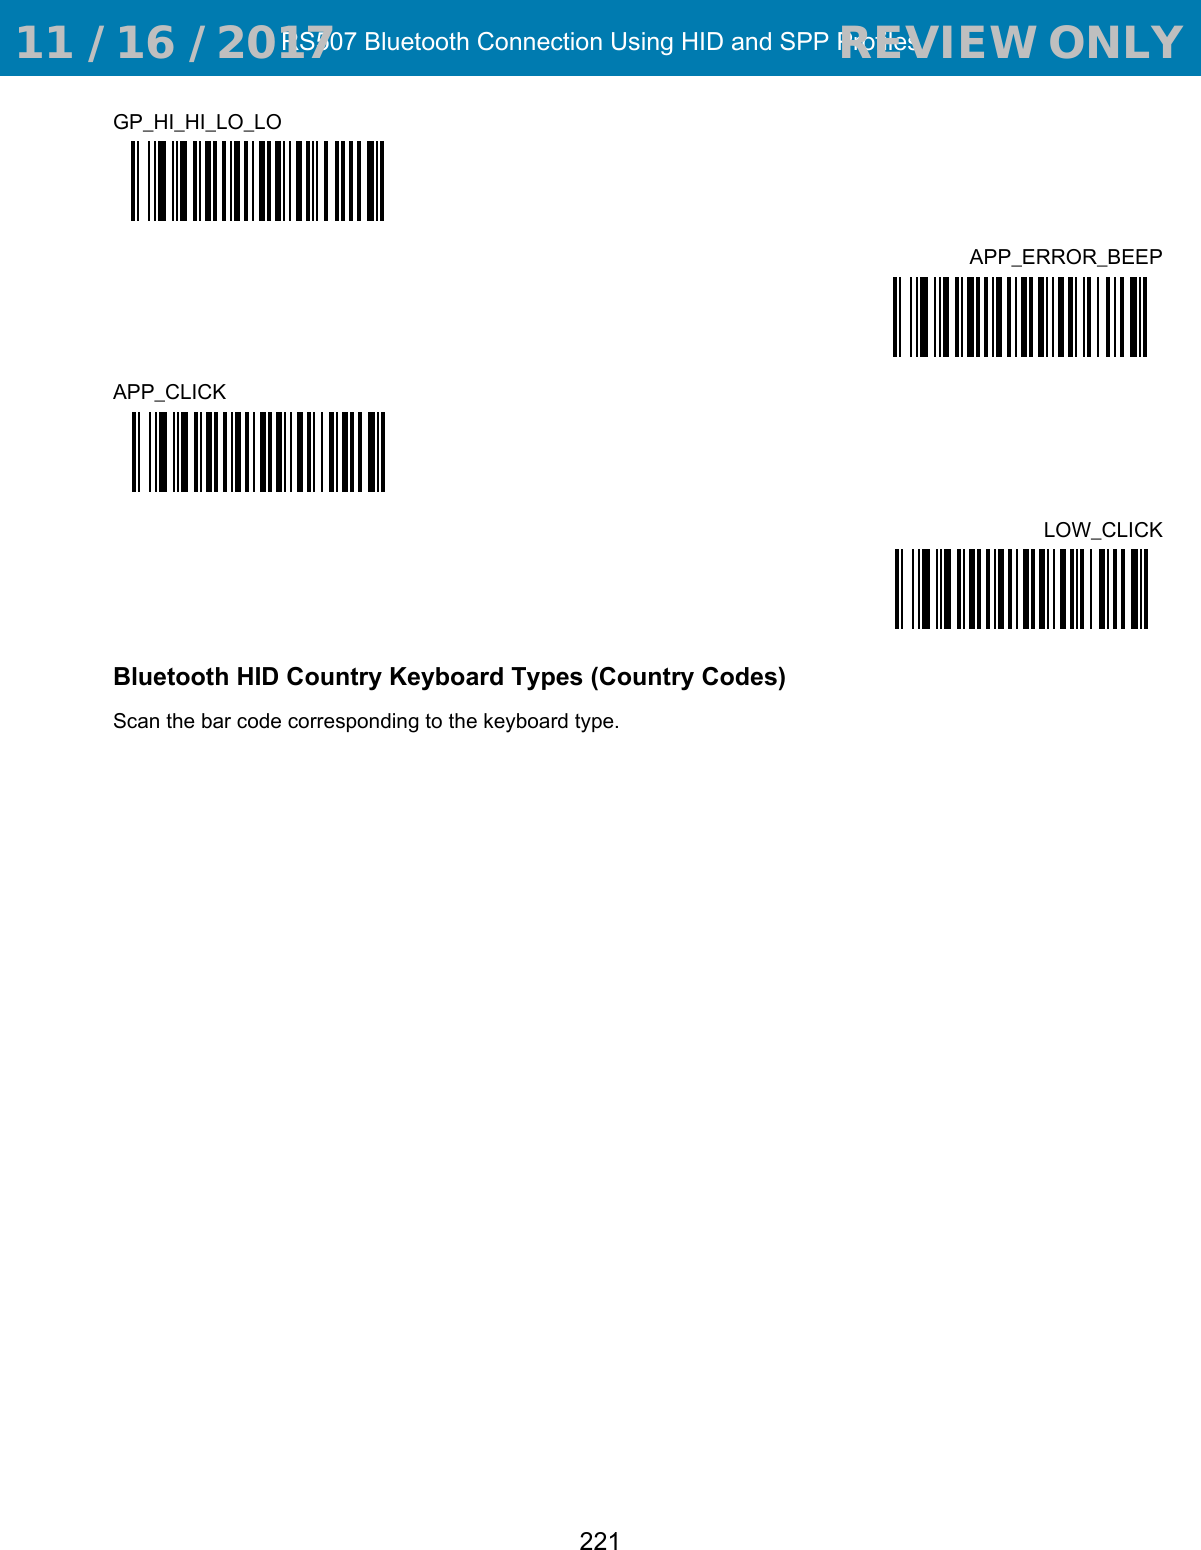 RS507 Bluetooth Connection Using HID and SPP Profiles221GP_HI_HI_LO_LOAPP_ERROR_BEEPAPP_CLICKLOW_CLICKBluetooth HID Country Keyboard Types (Country Codes)Scan the bar code corresponding to the keyboard type. 11 / 16 / 2017                                  REVIEW ONLY                             REVIEW ONLY - REVIEW ONLY - REVIEW ONLY